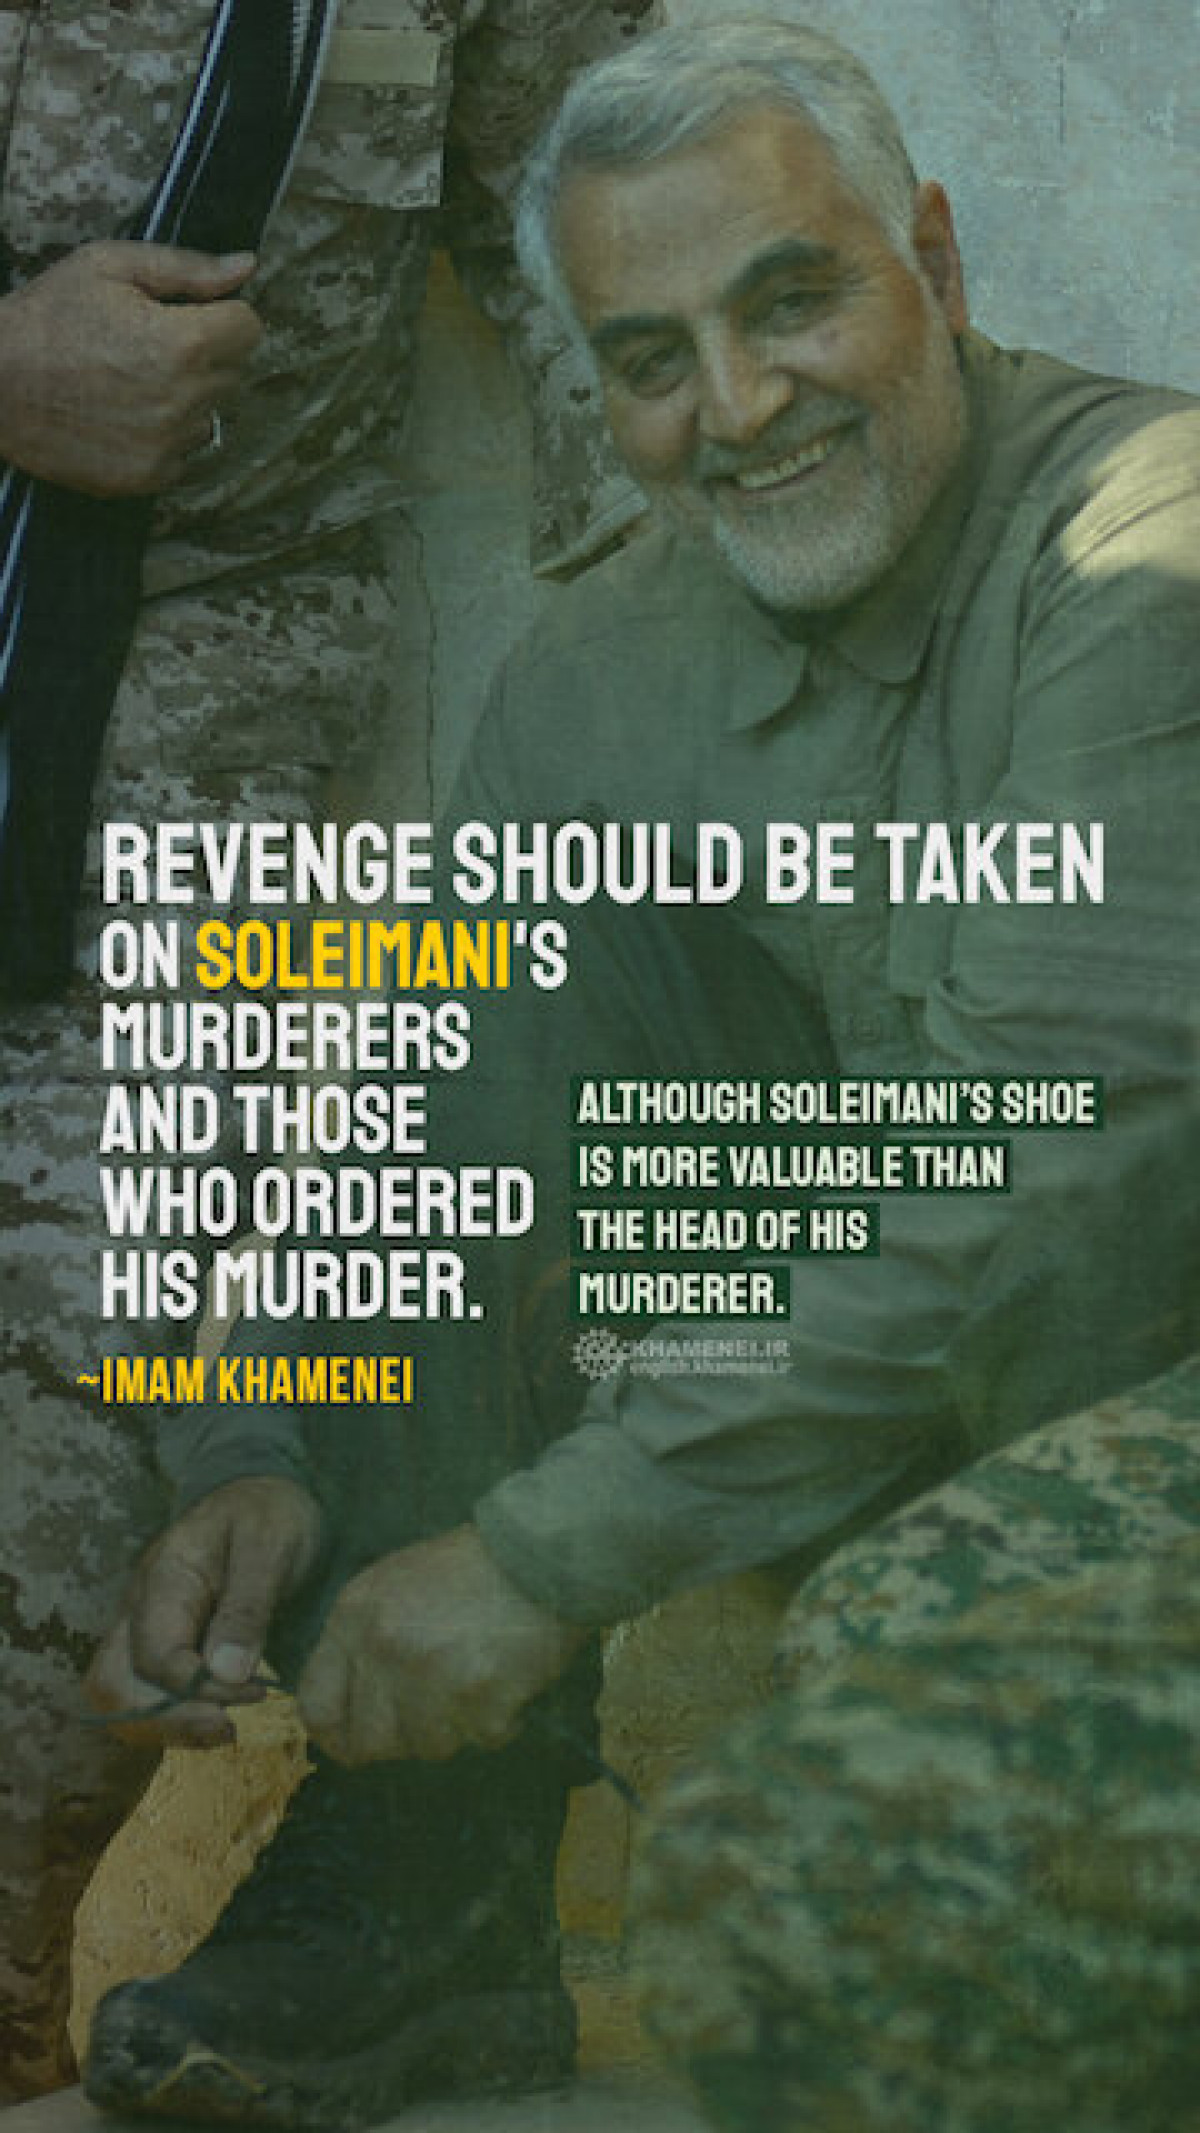 Revenge should be taken on Soleimani's murderers and those who ordered it